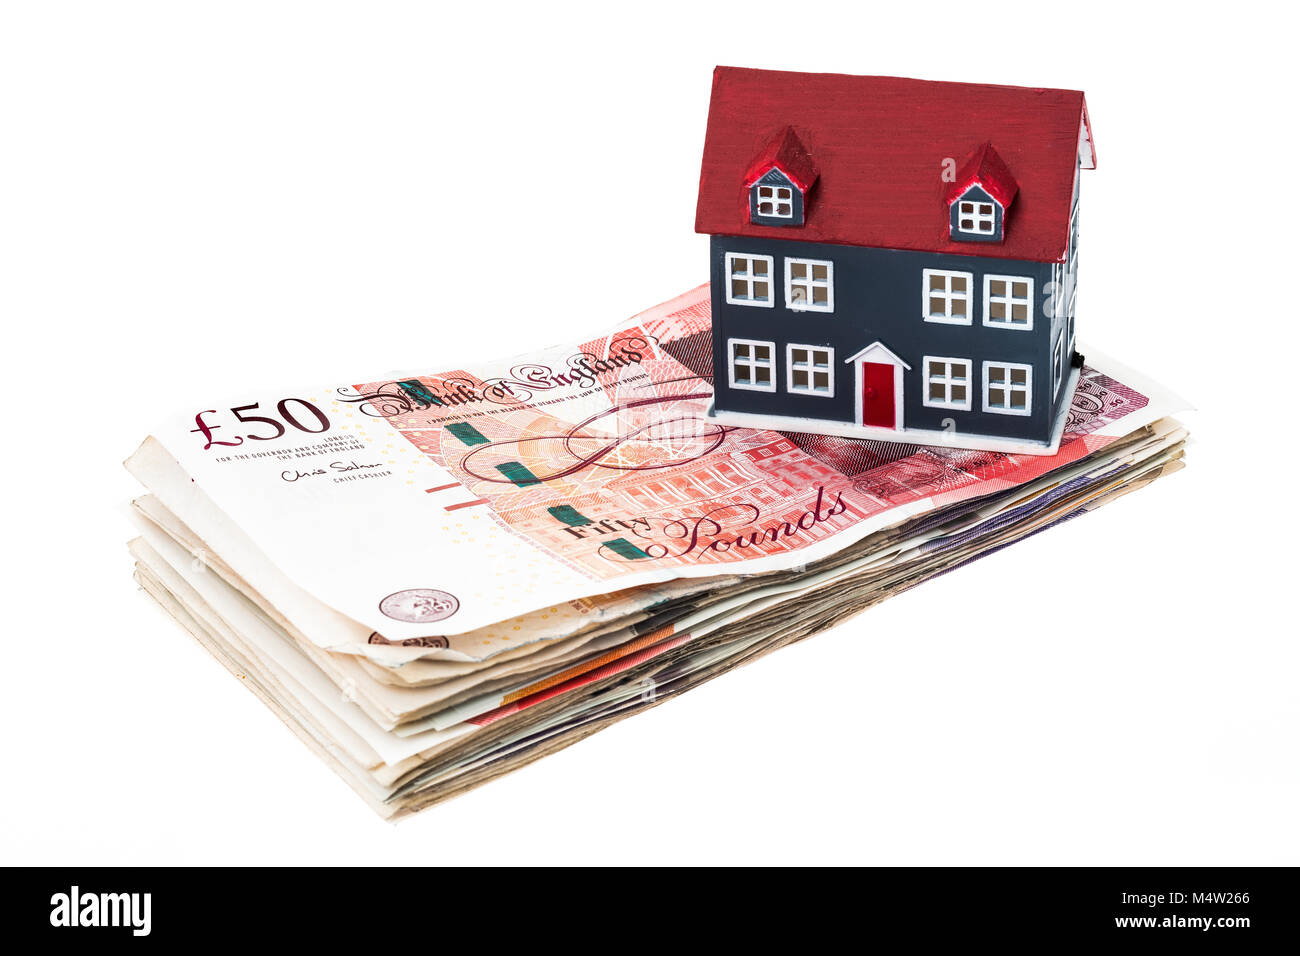 House buying concept image of UK banknotes and a house Stock Photo